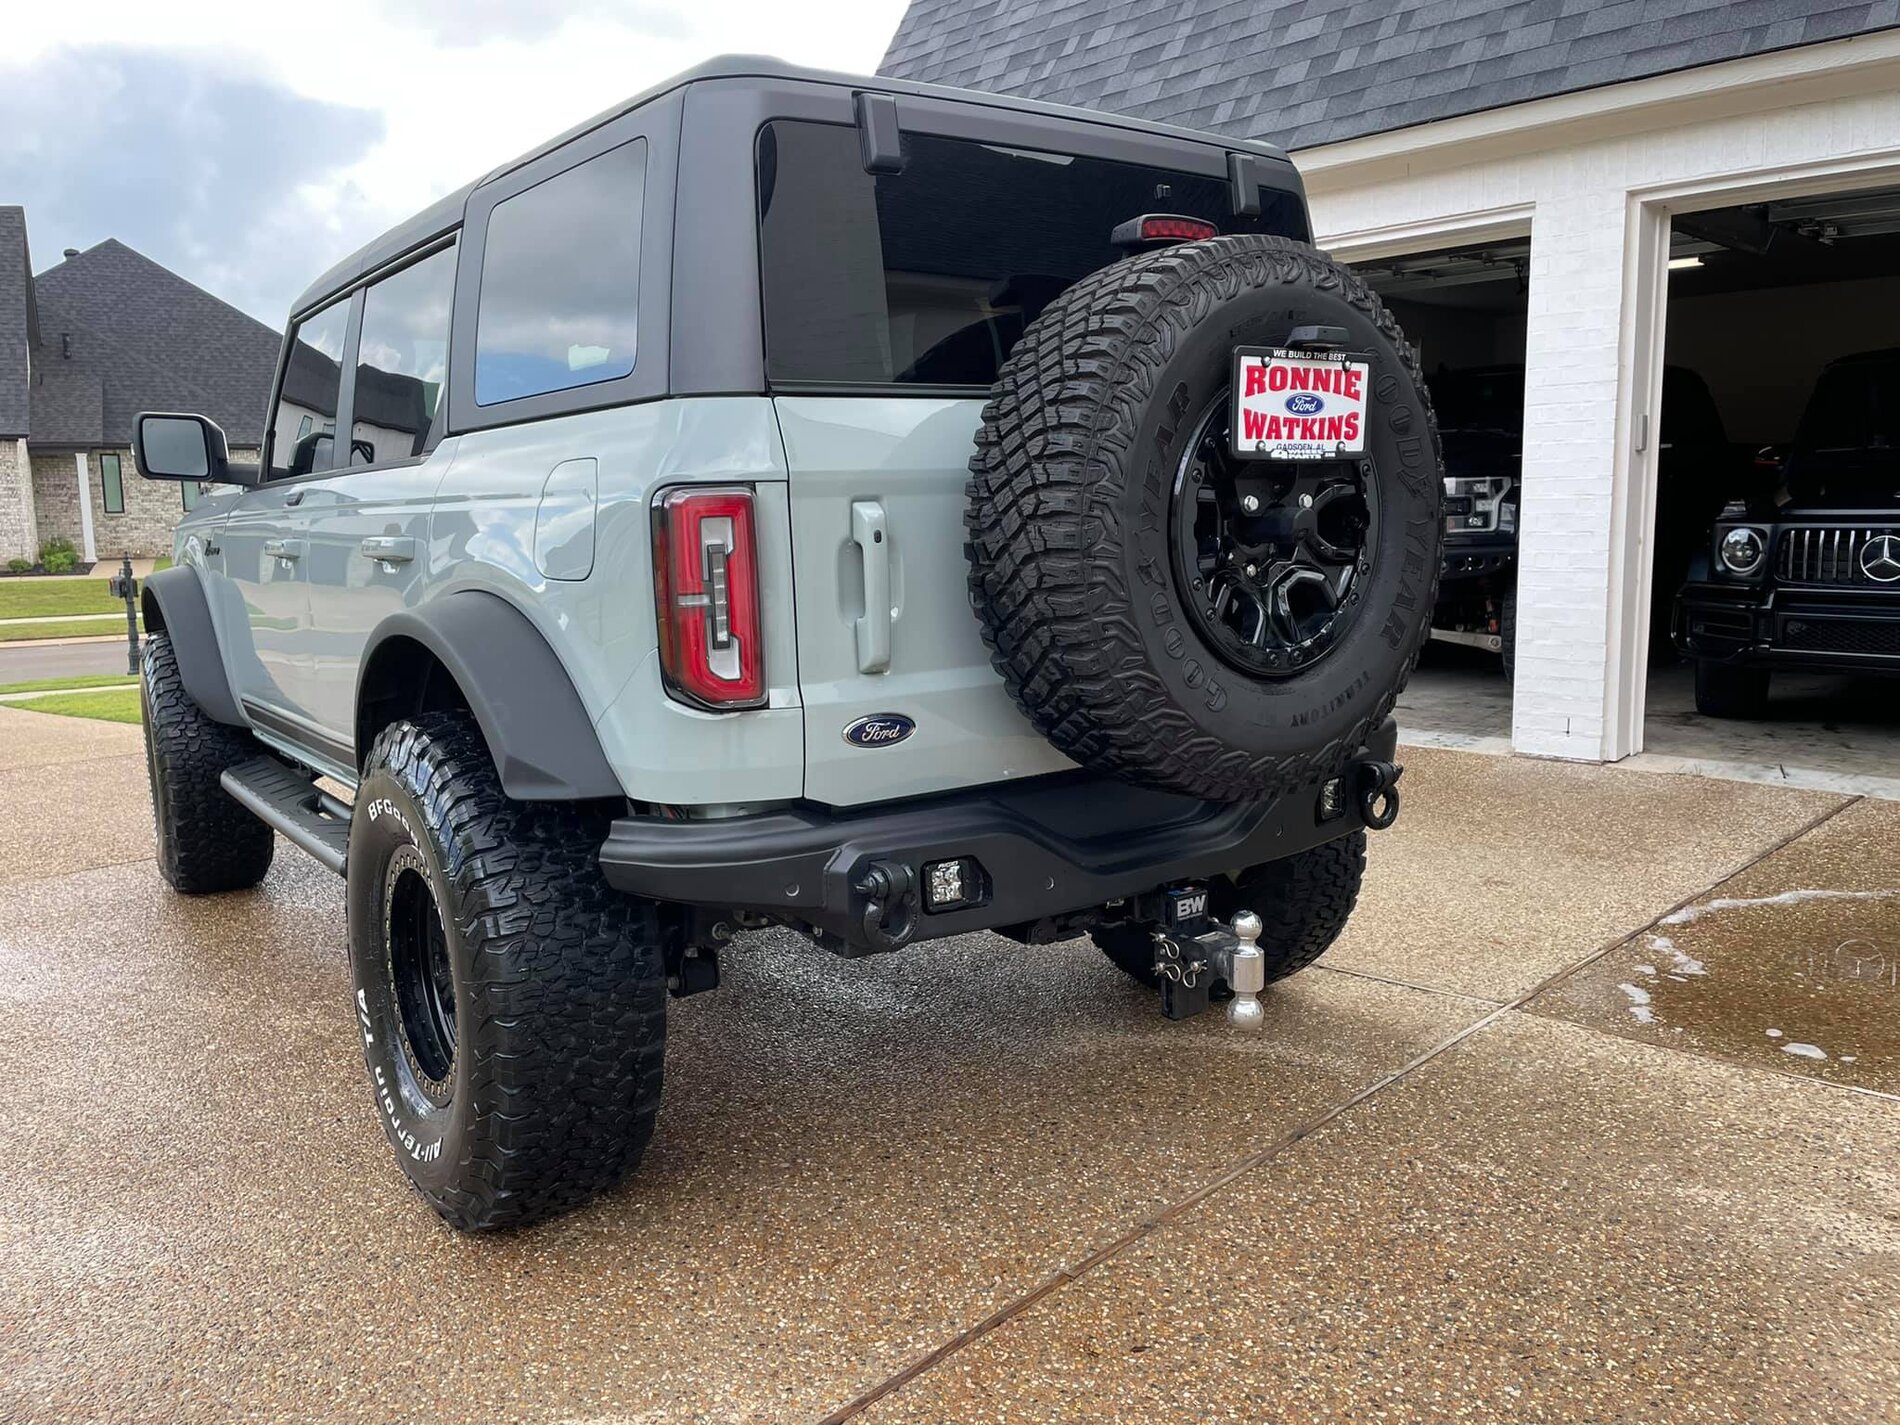 Modified Bronco First Edition Cactus Gray build by 4WP 5.jpg